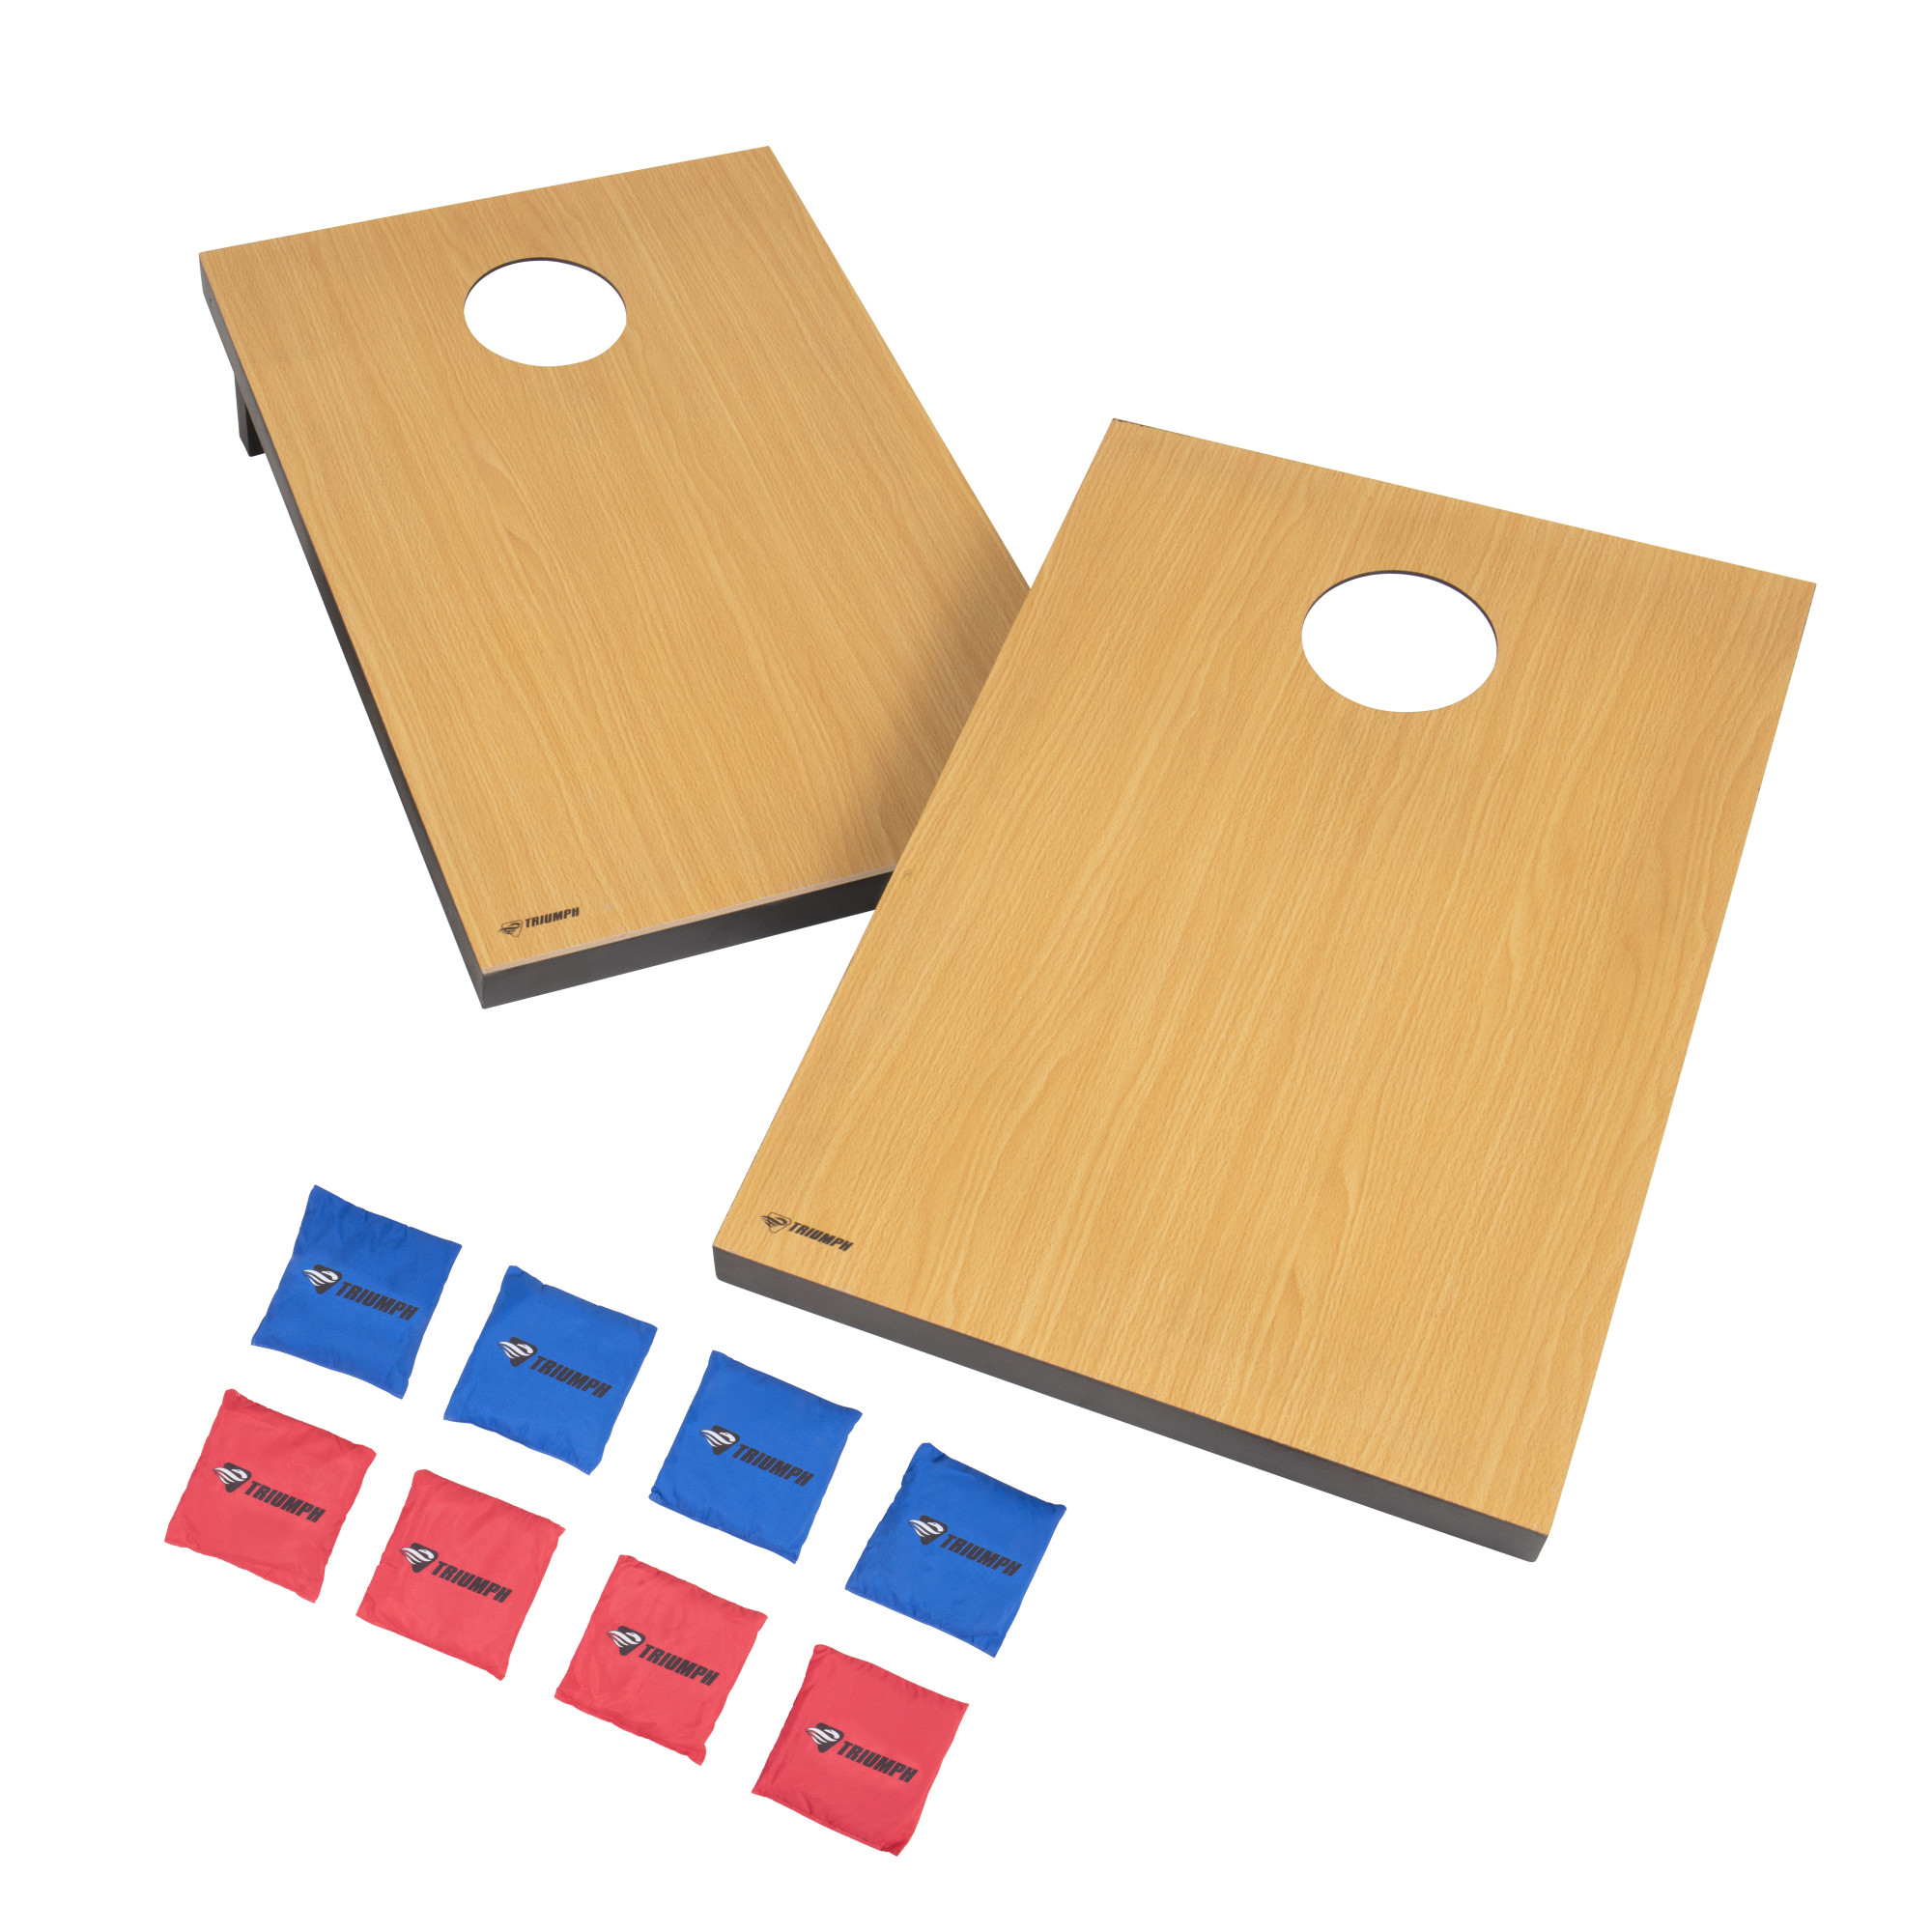 Triumph Tournament Bean Bag Toss Game with Two Wooden Portable Game Platforms on Foldable Legs and Eight Toss Bags - image 1 of 9